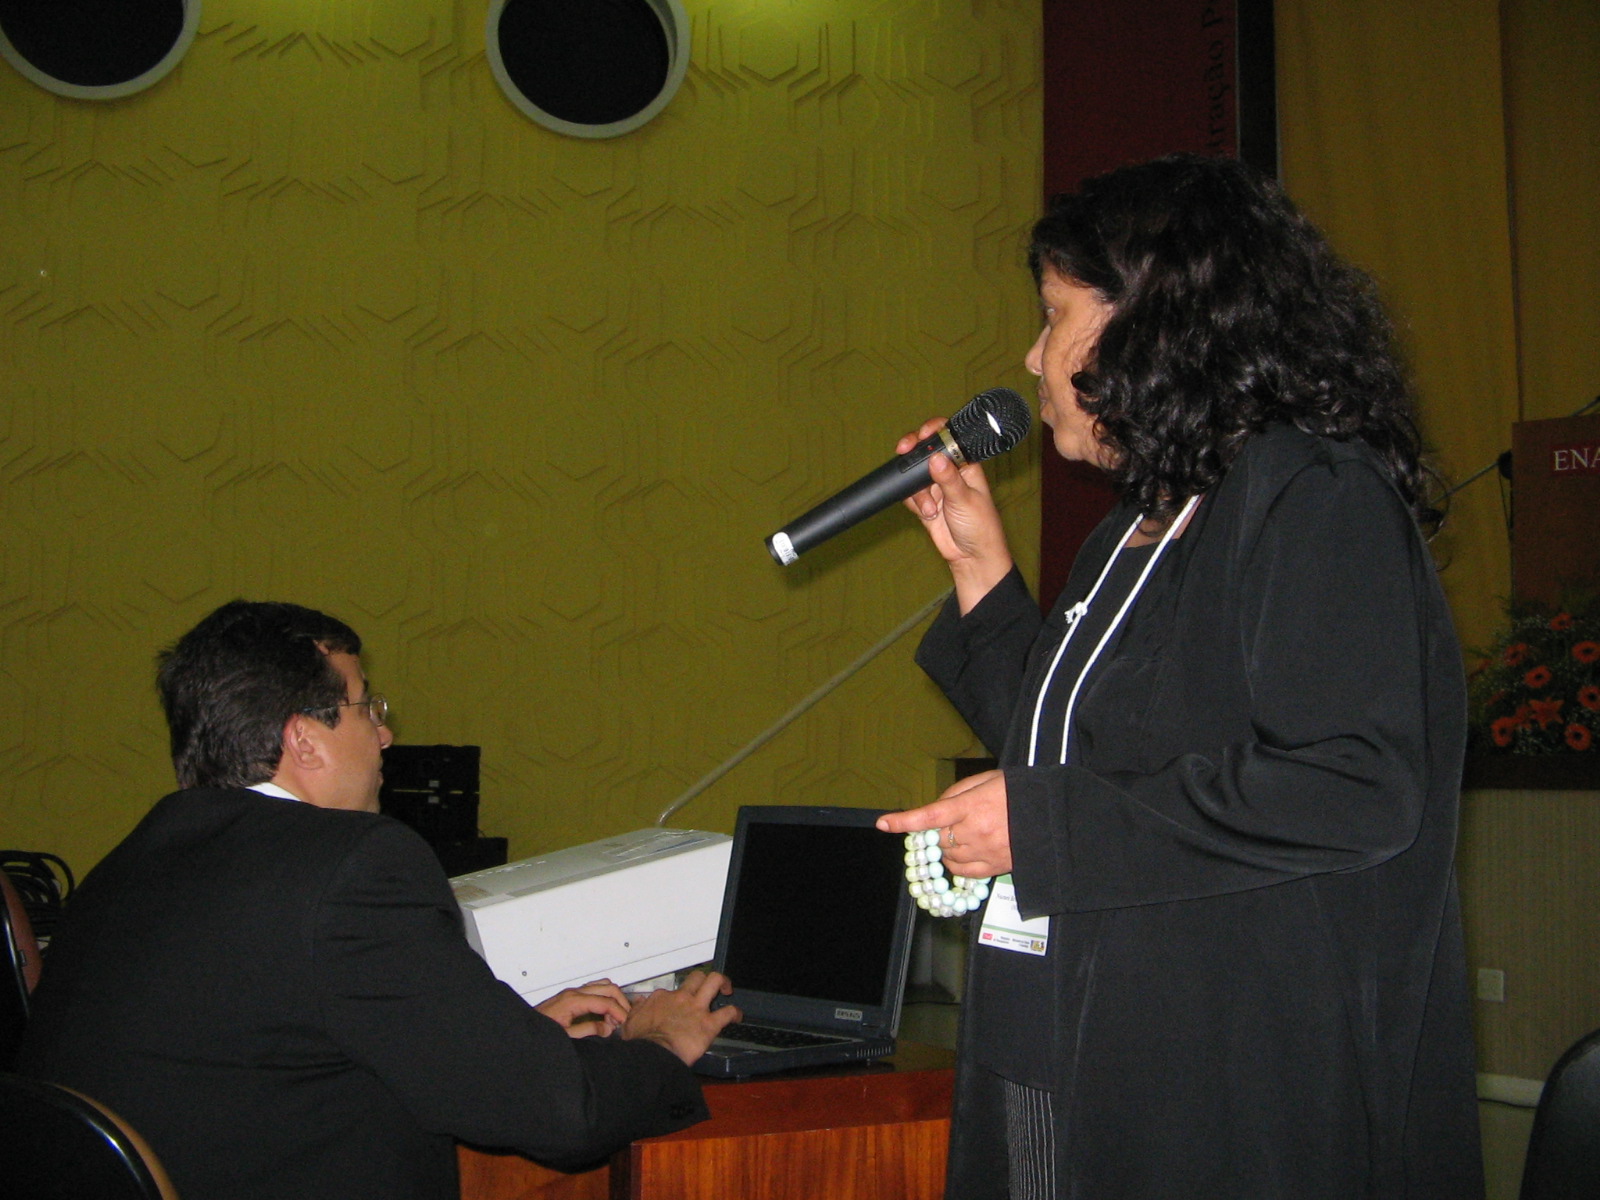 a woman on a microphone speaking into a man in a black suit